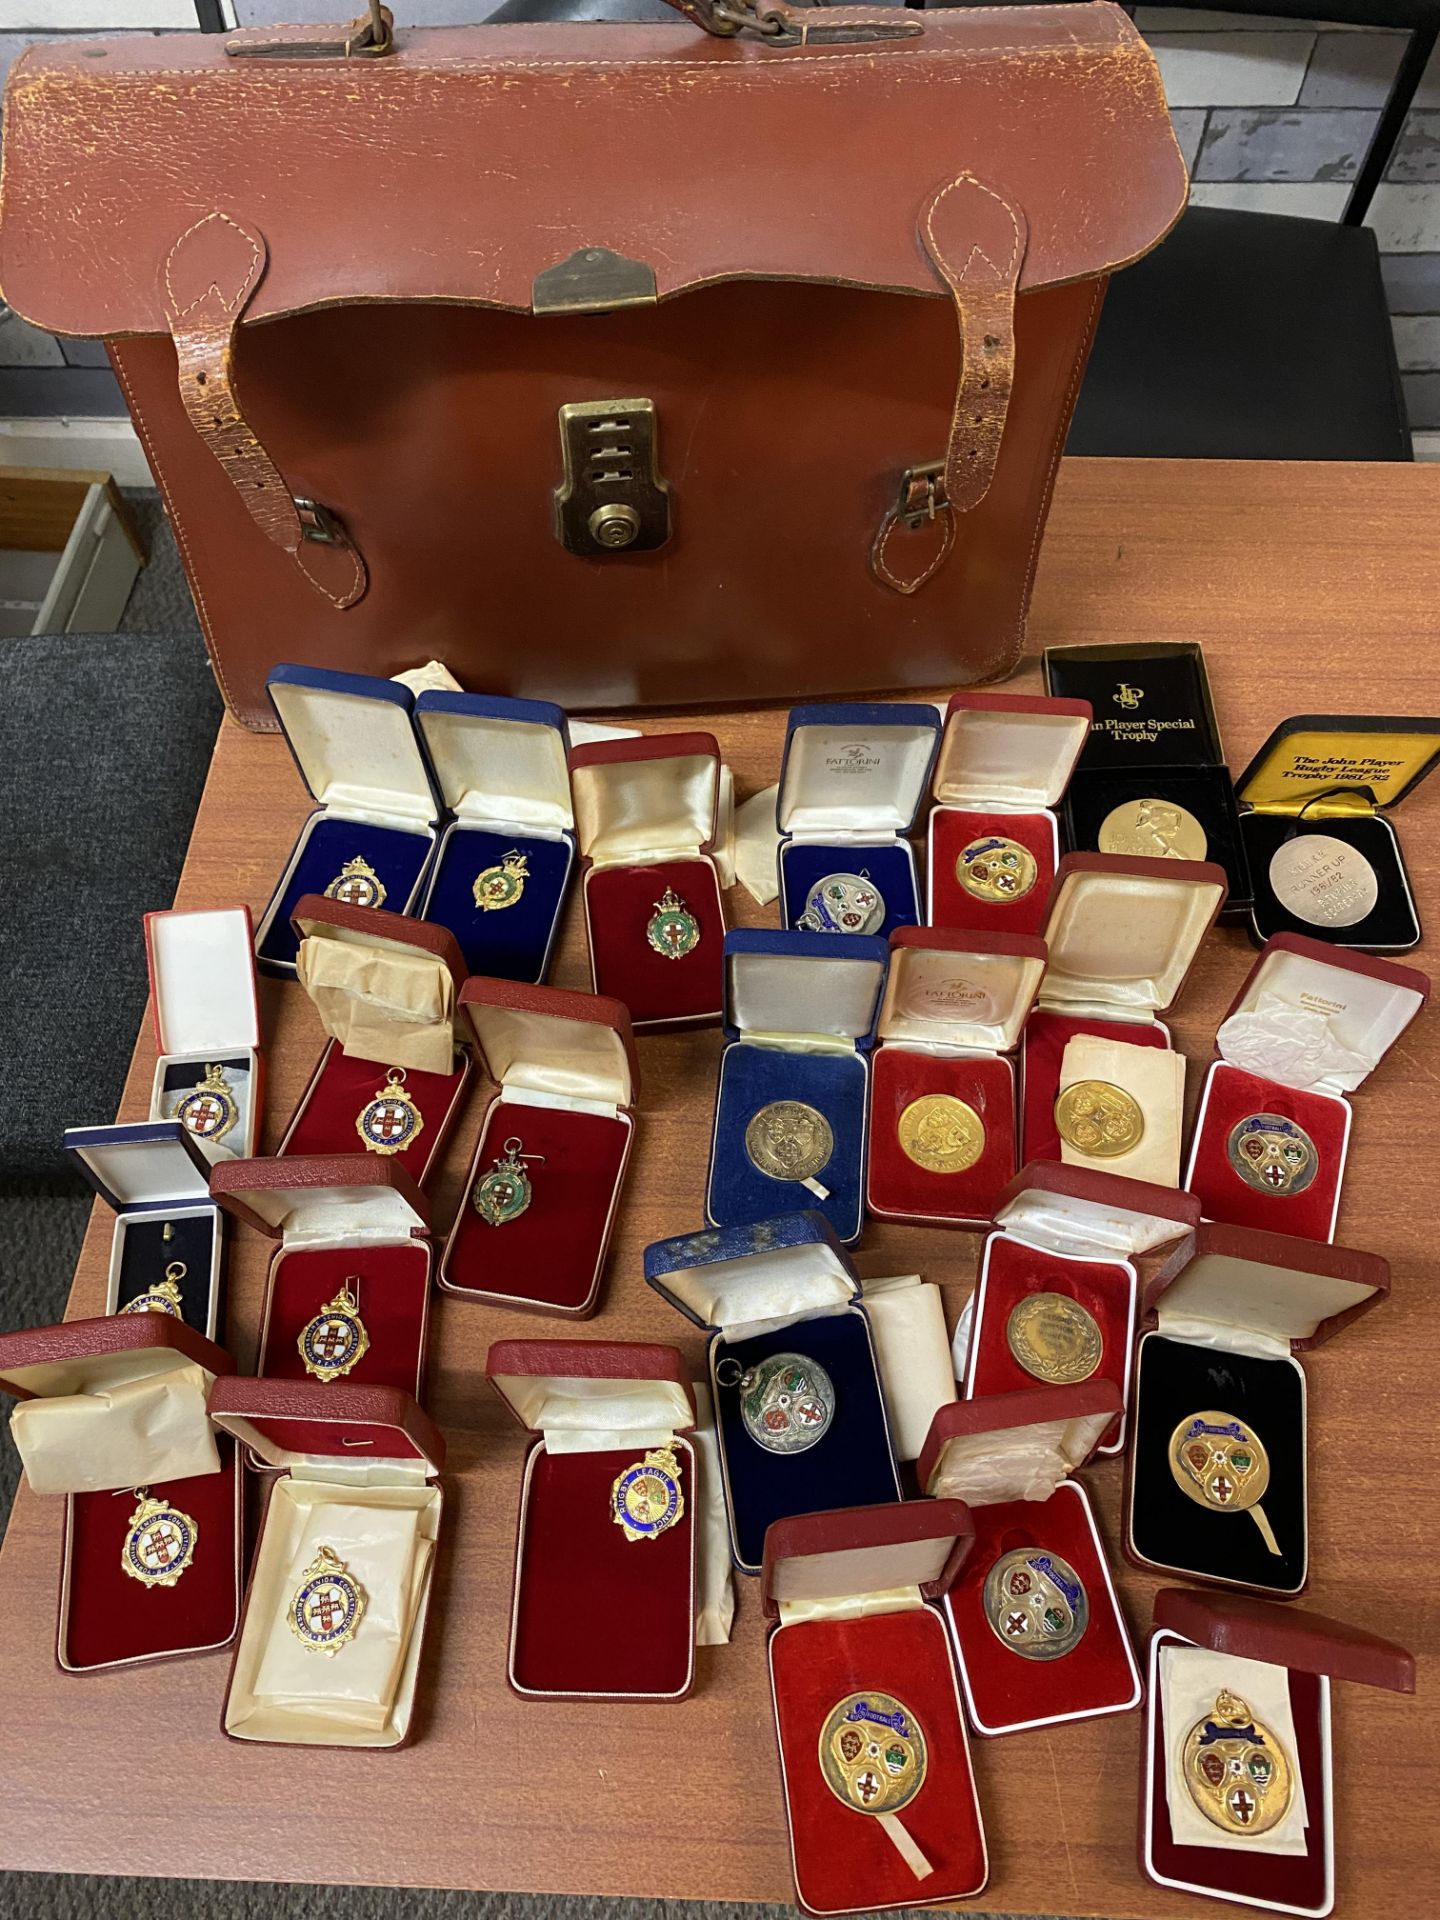 Briefcase containing 24 rugby Hull KR rugby league medals